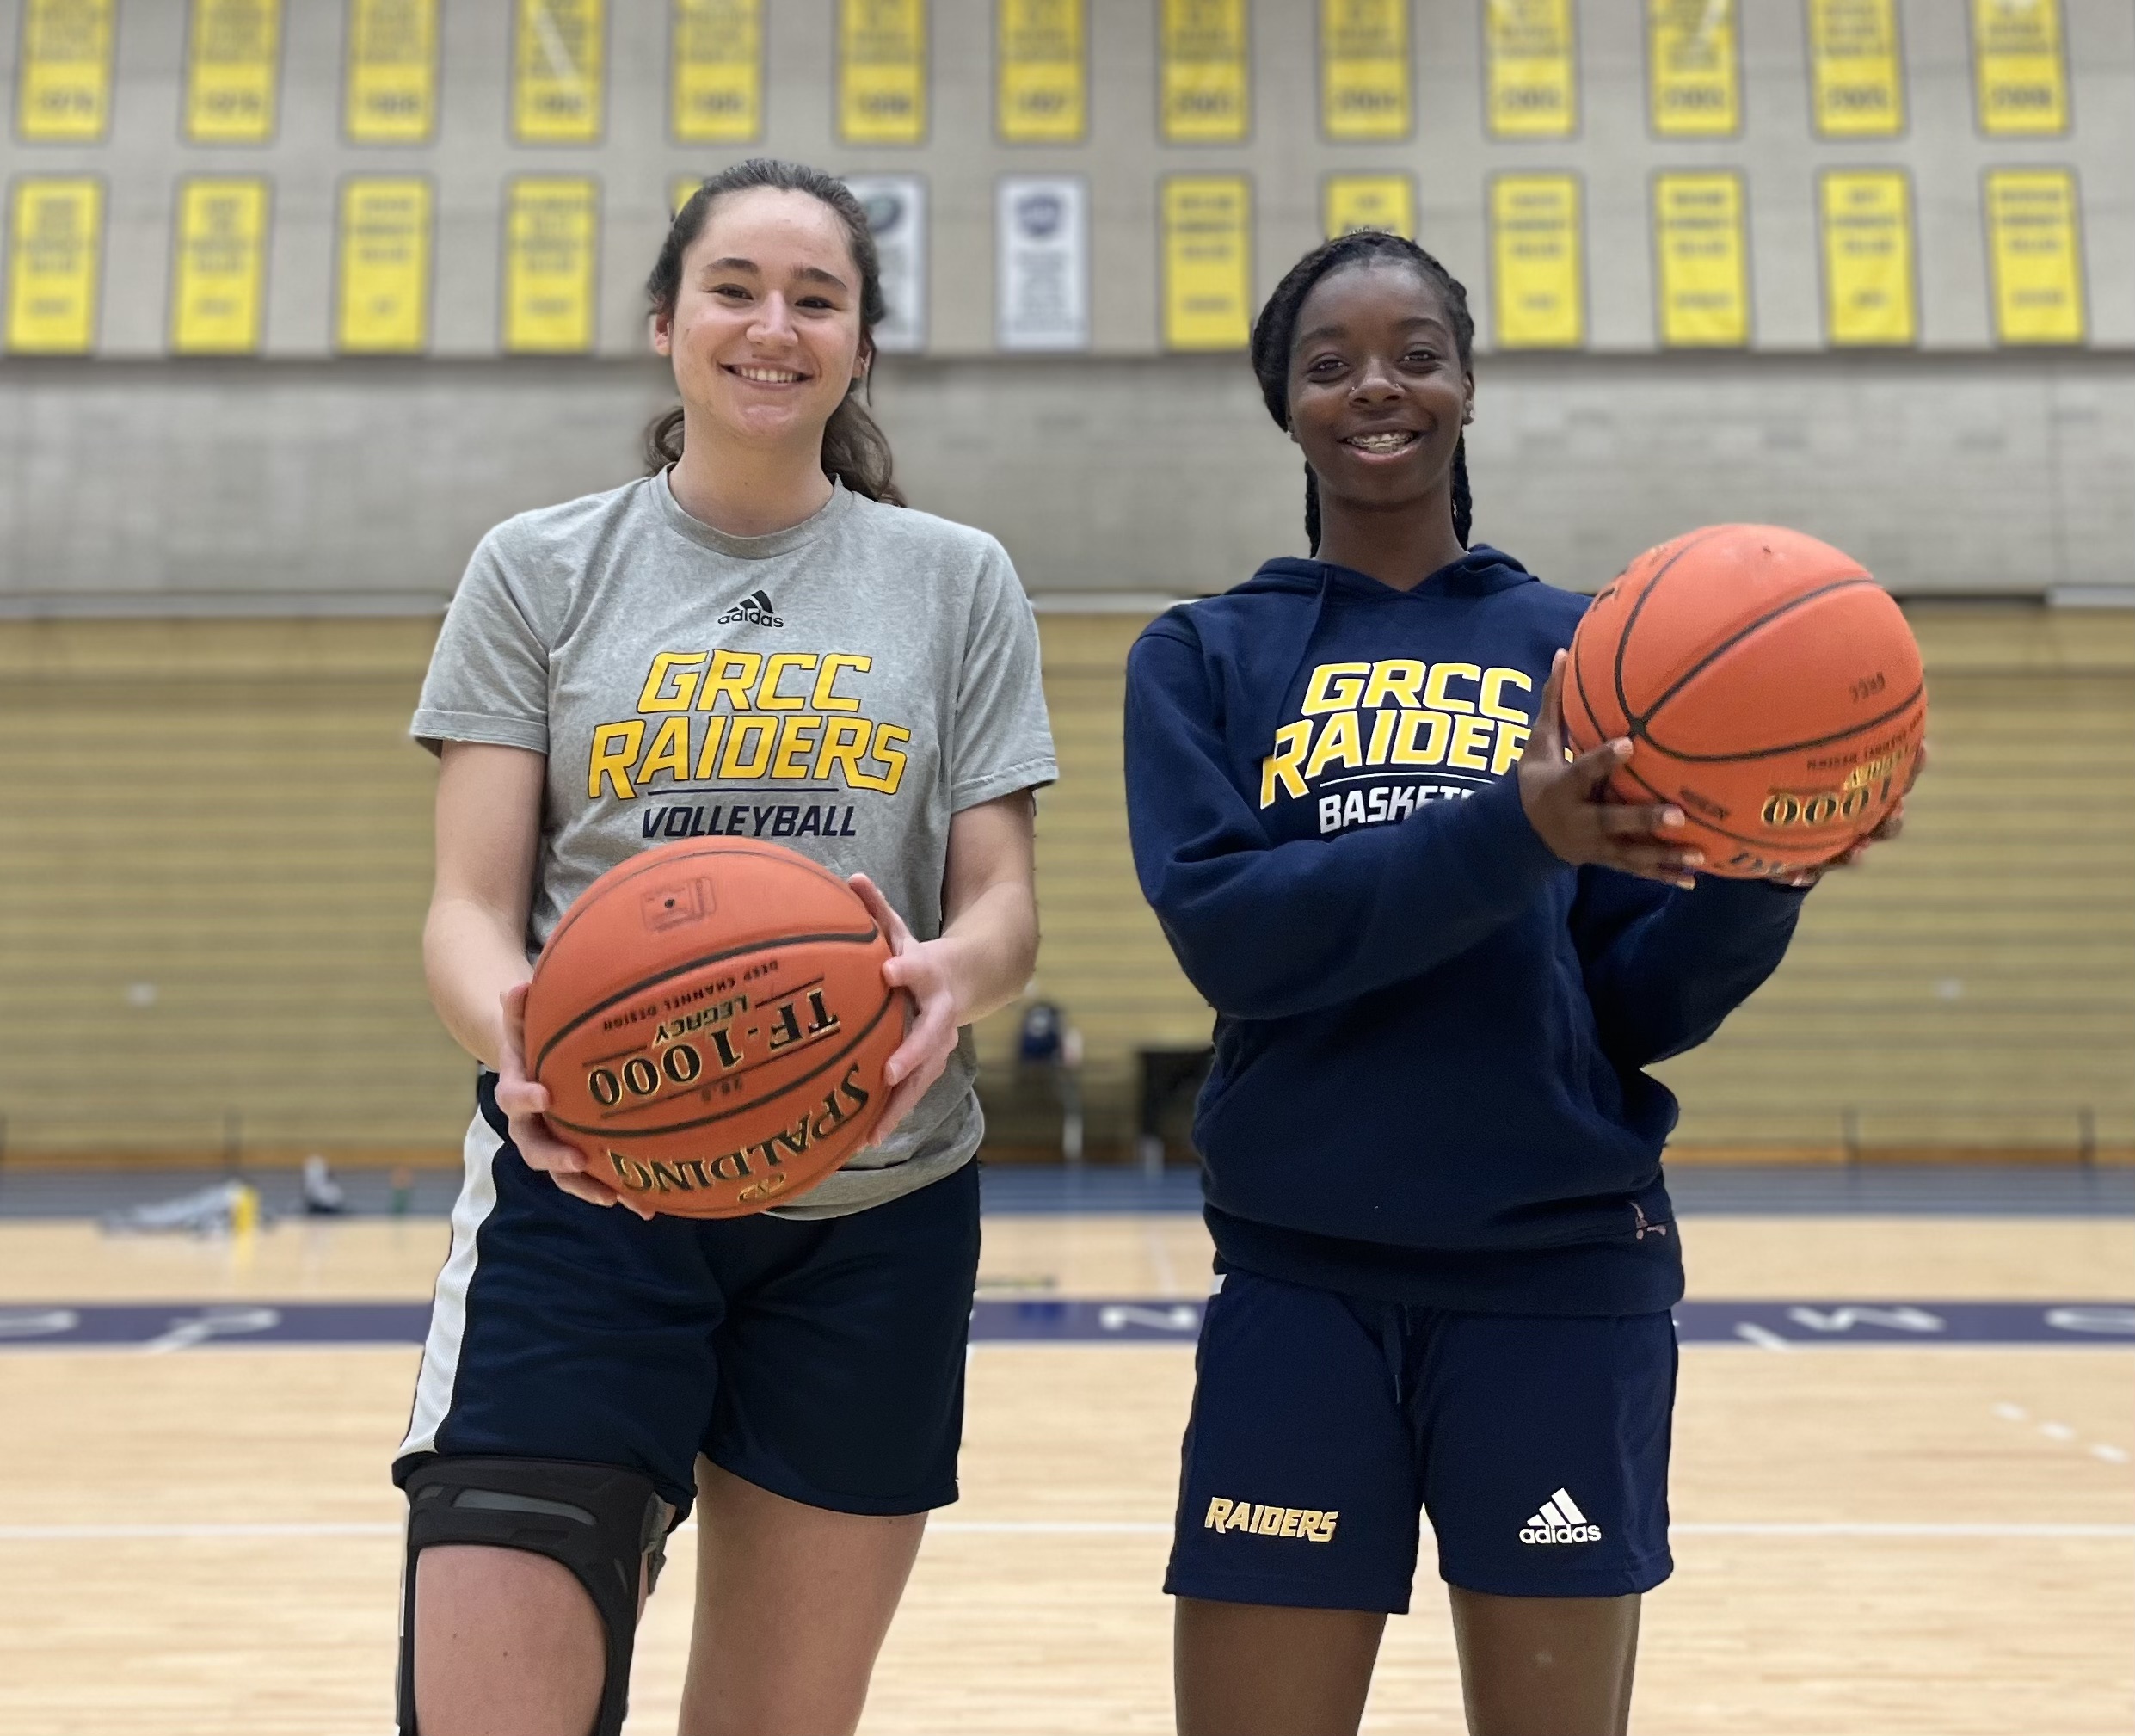 het laatste zonlicht Vervagen Loud and proud: Official GRCC Raiders athletic apparel available for  limited time through online store | Grand Rapids Community College